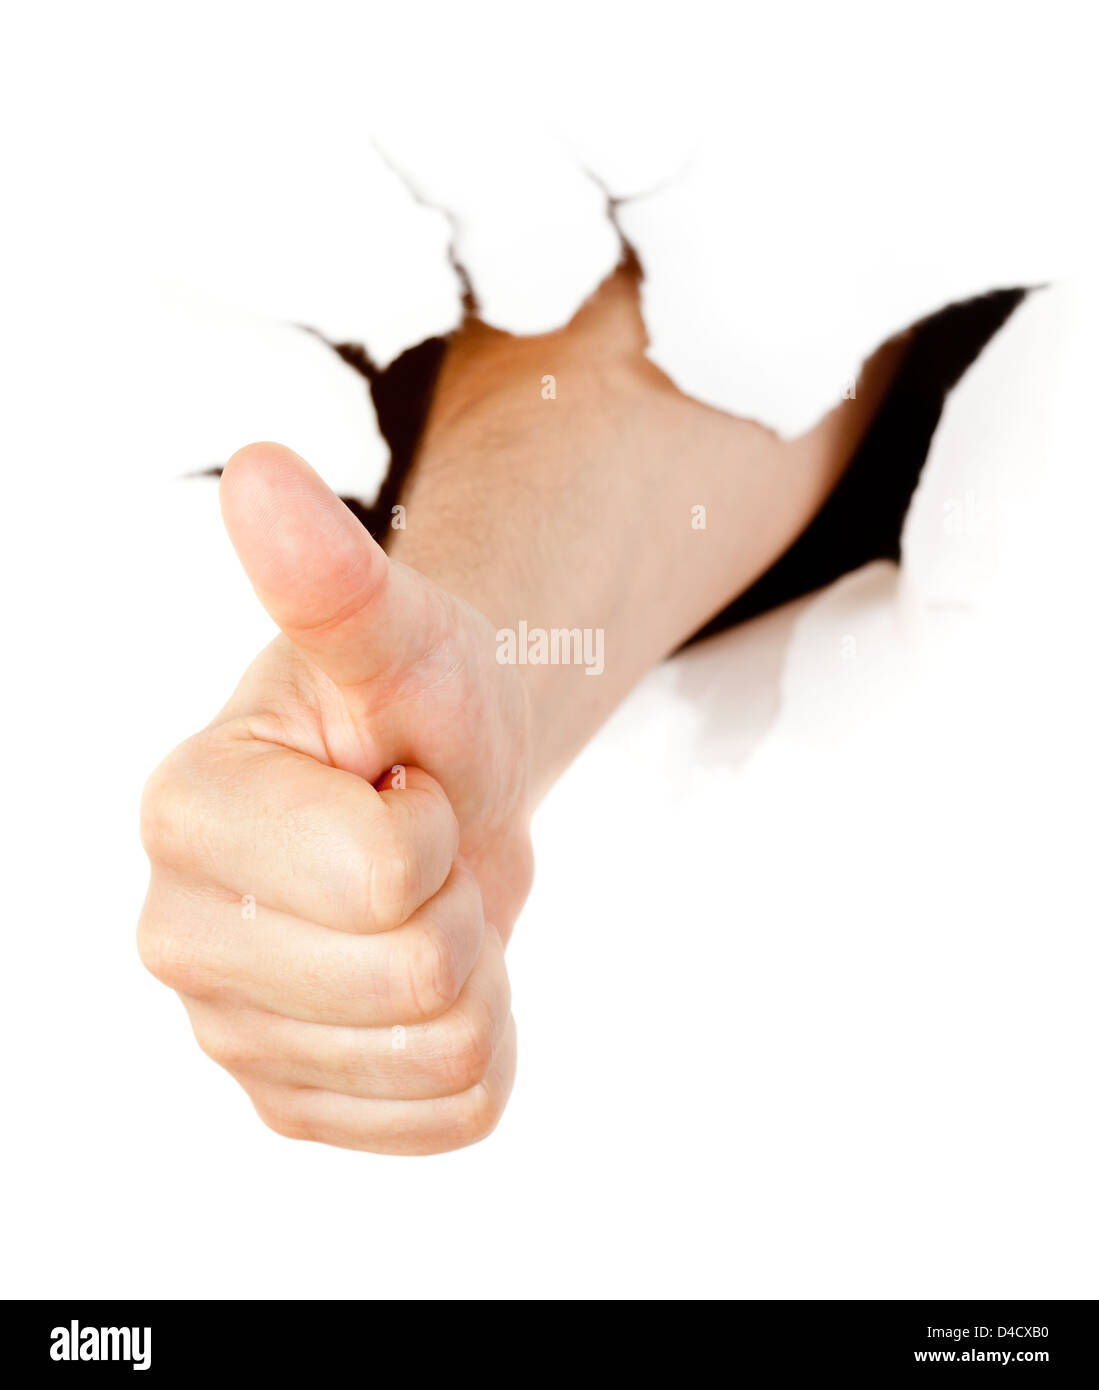 Hand with thumb up through a hole in paper Stock Photo